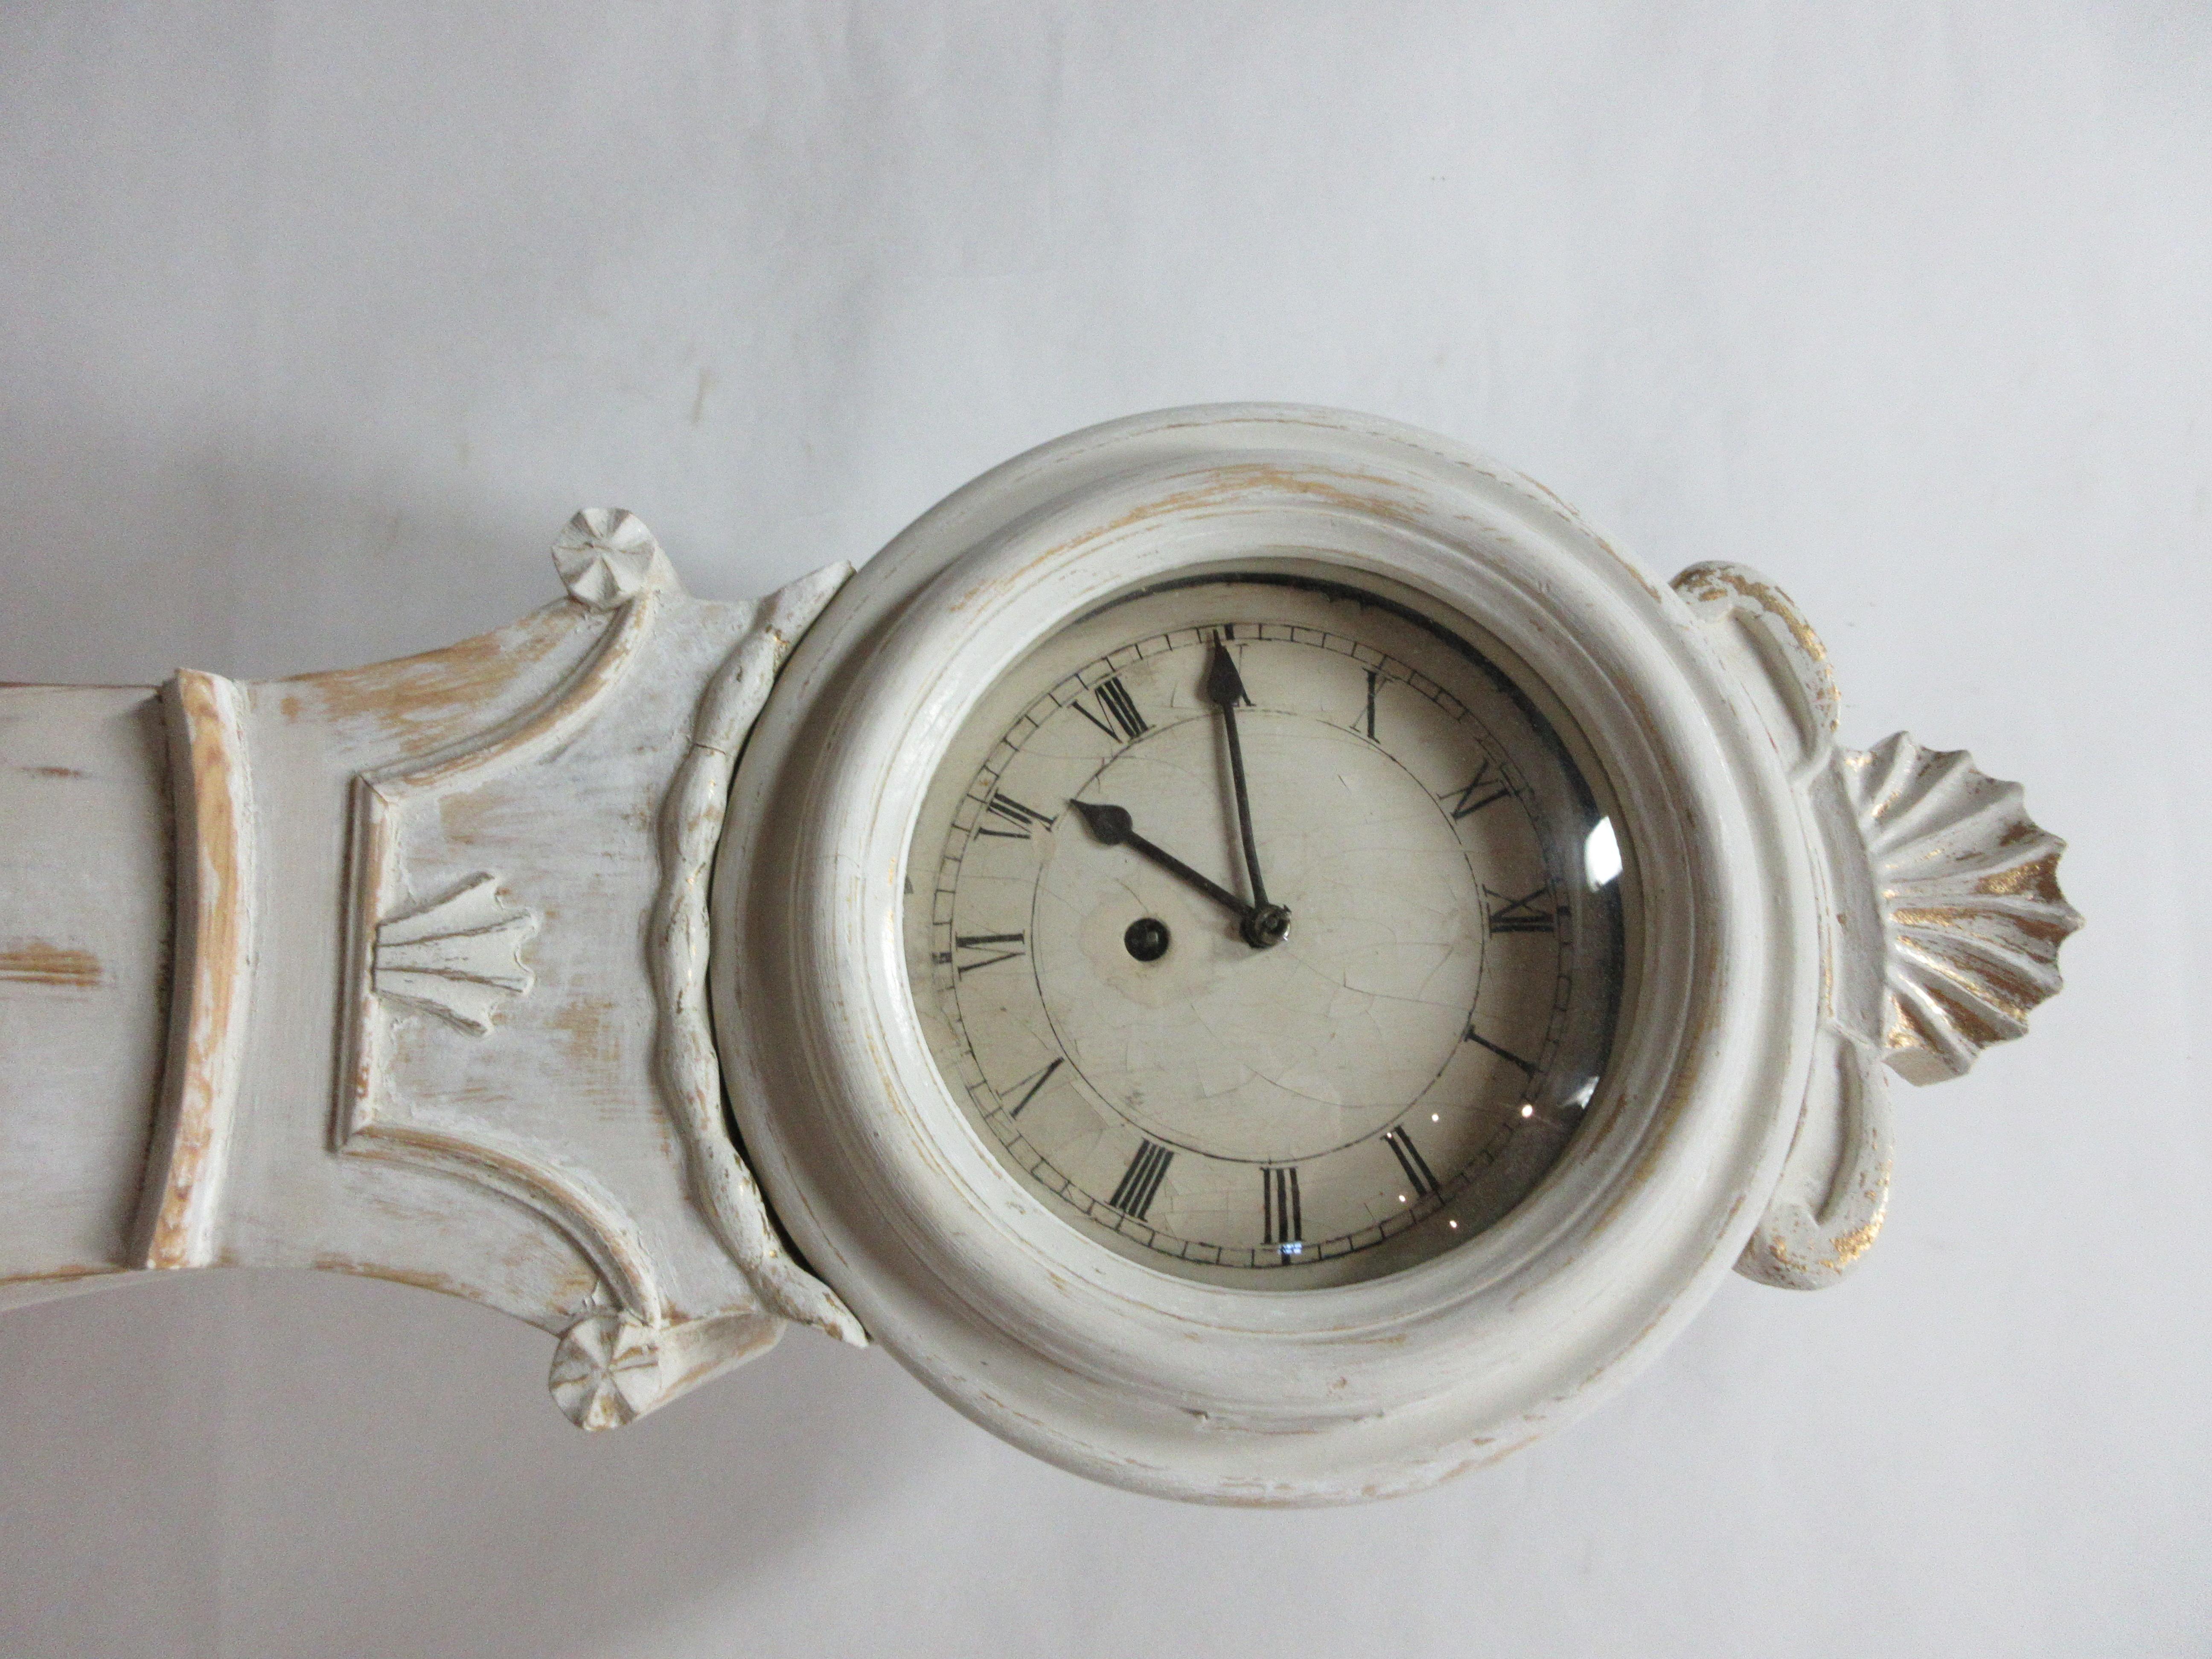 This is a rare Swedish Mora clock known as a 